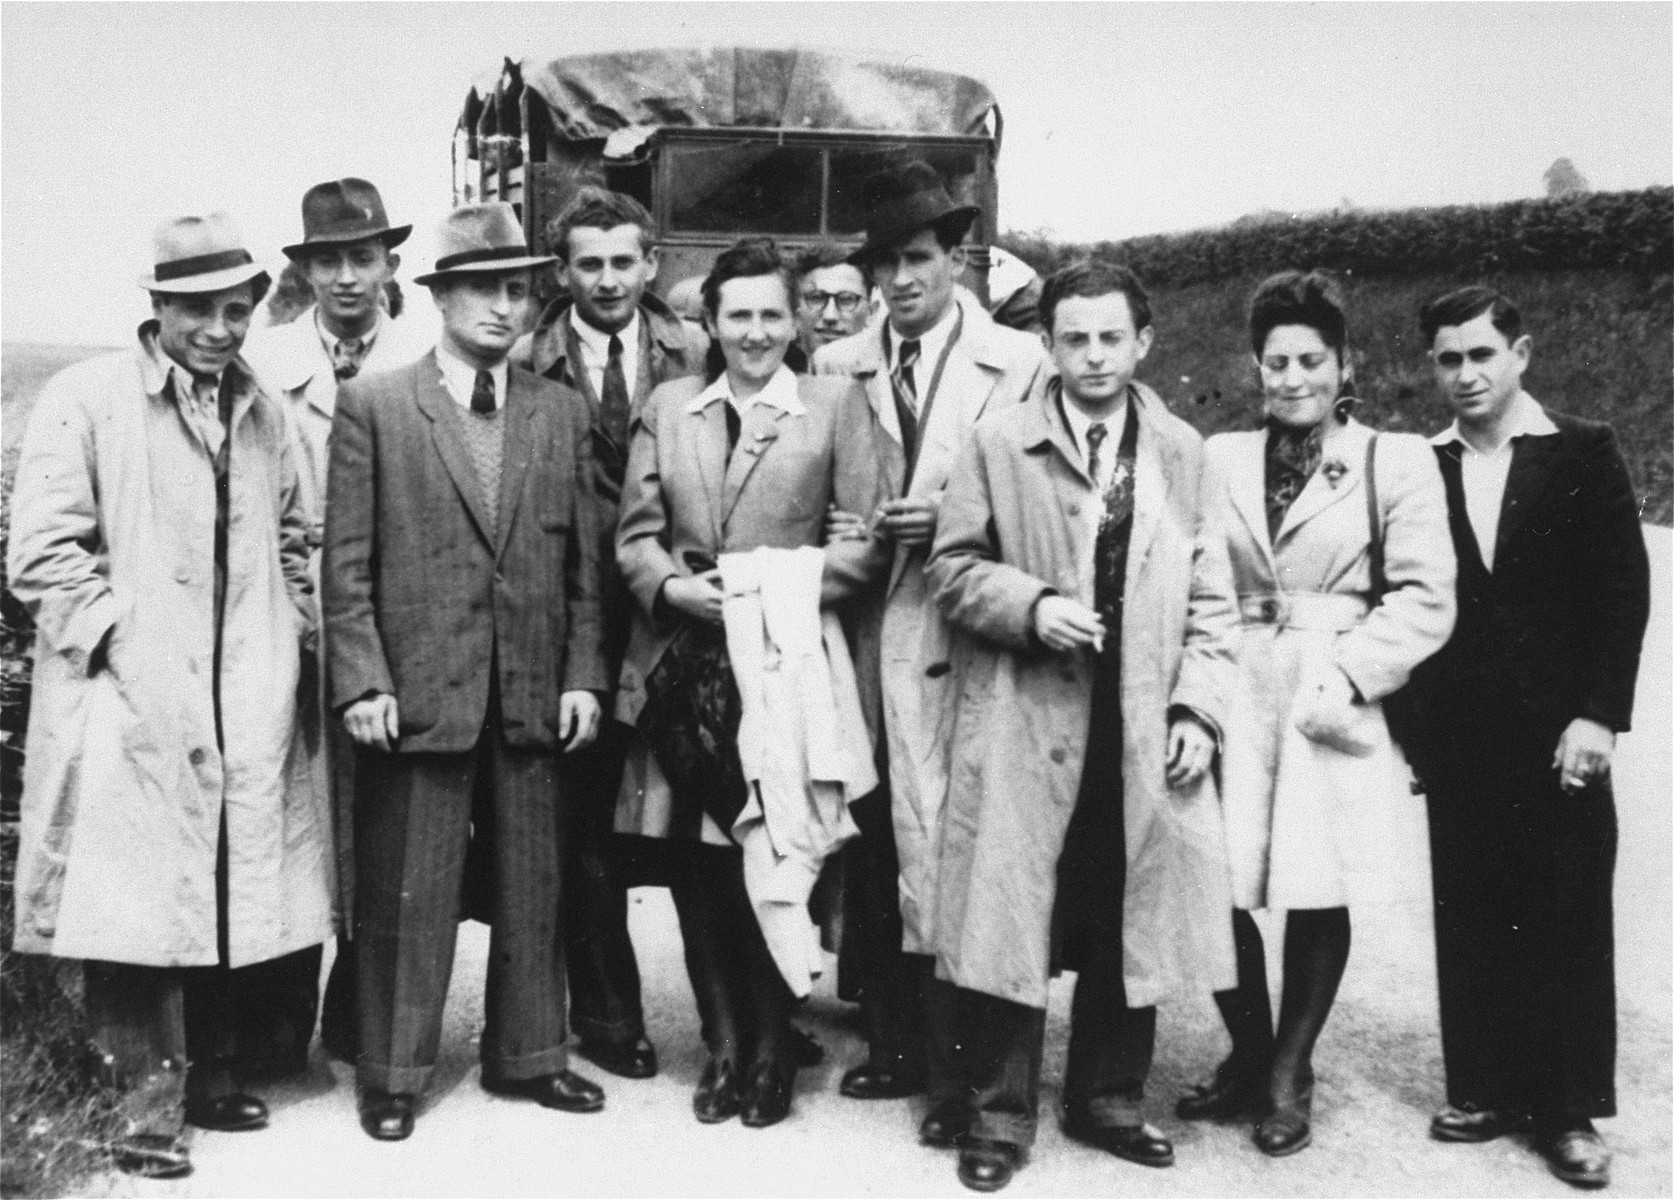 Group portrait of Jewish DPs from the Foehrenwald displaced persons camp on an excursion to Garmisch.

Among those pictured is Pinhas Kirszenblat (third from the right) and Cima Zalcberk (second from the right).